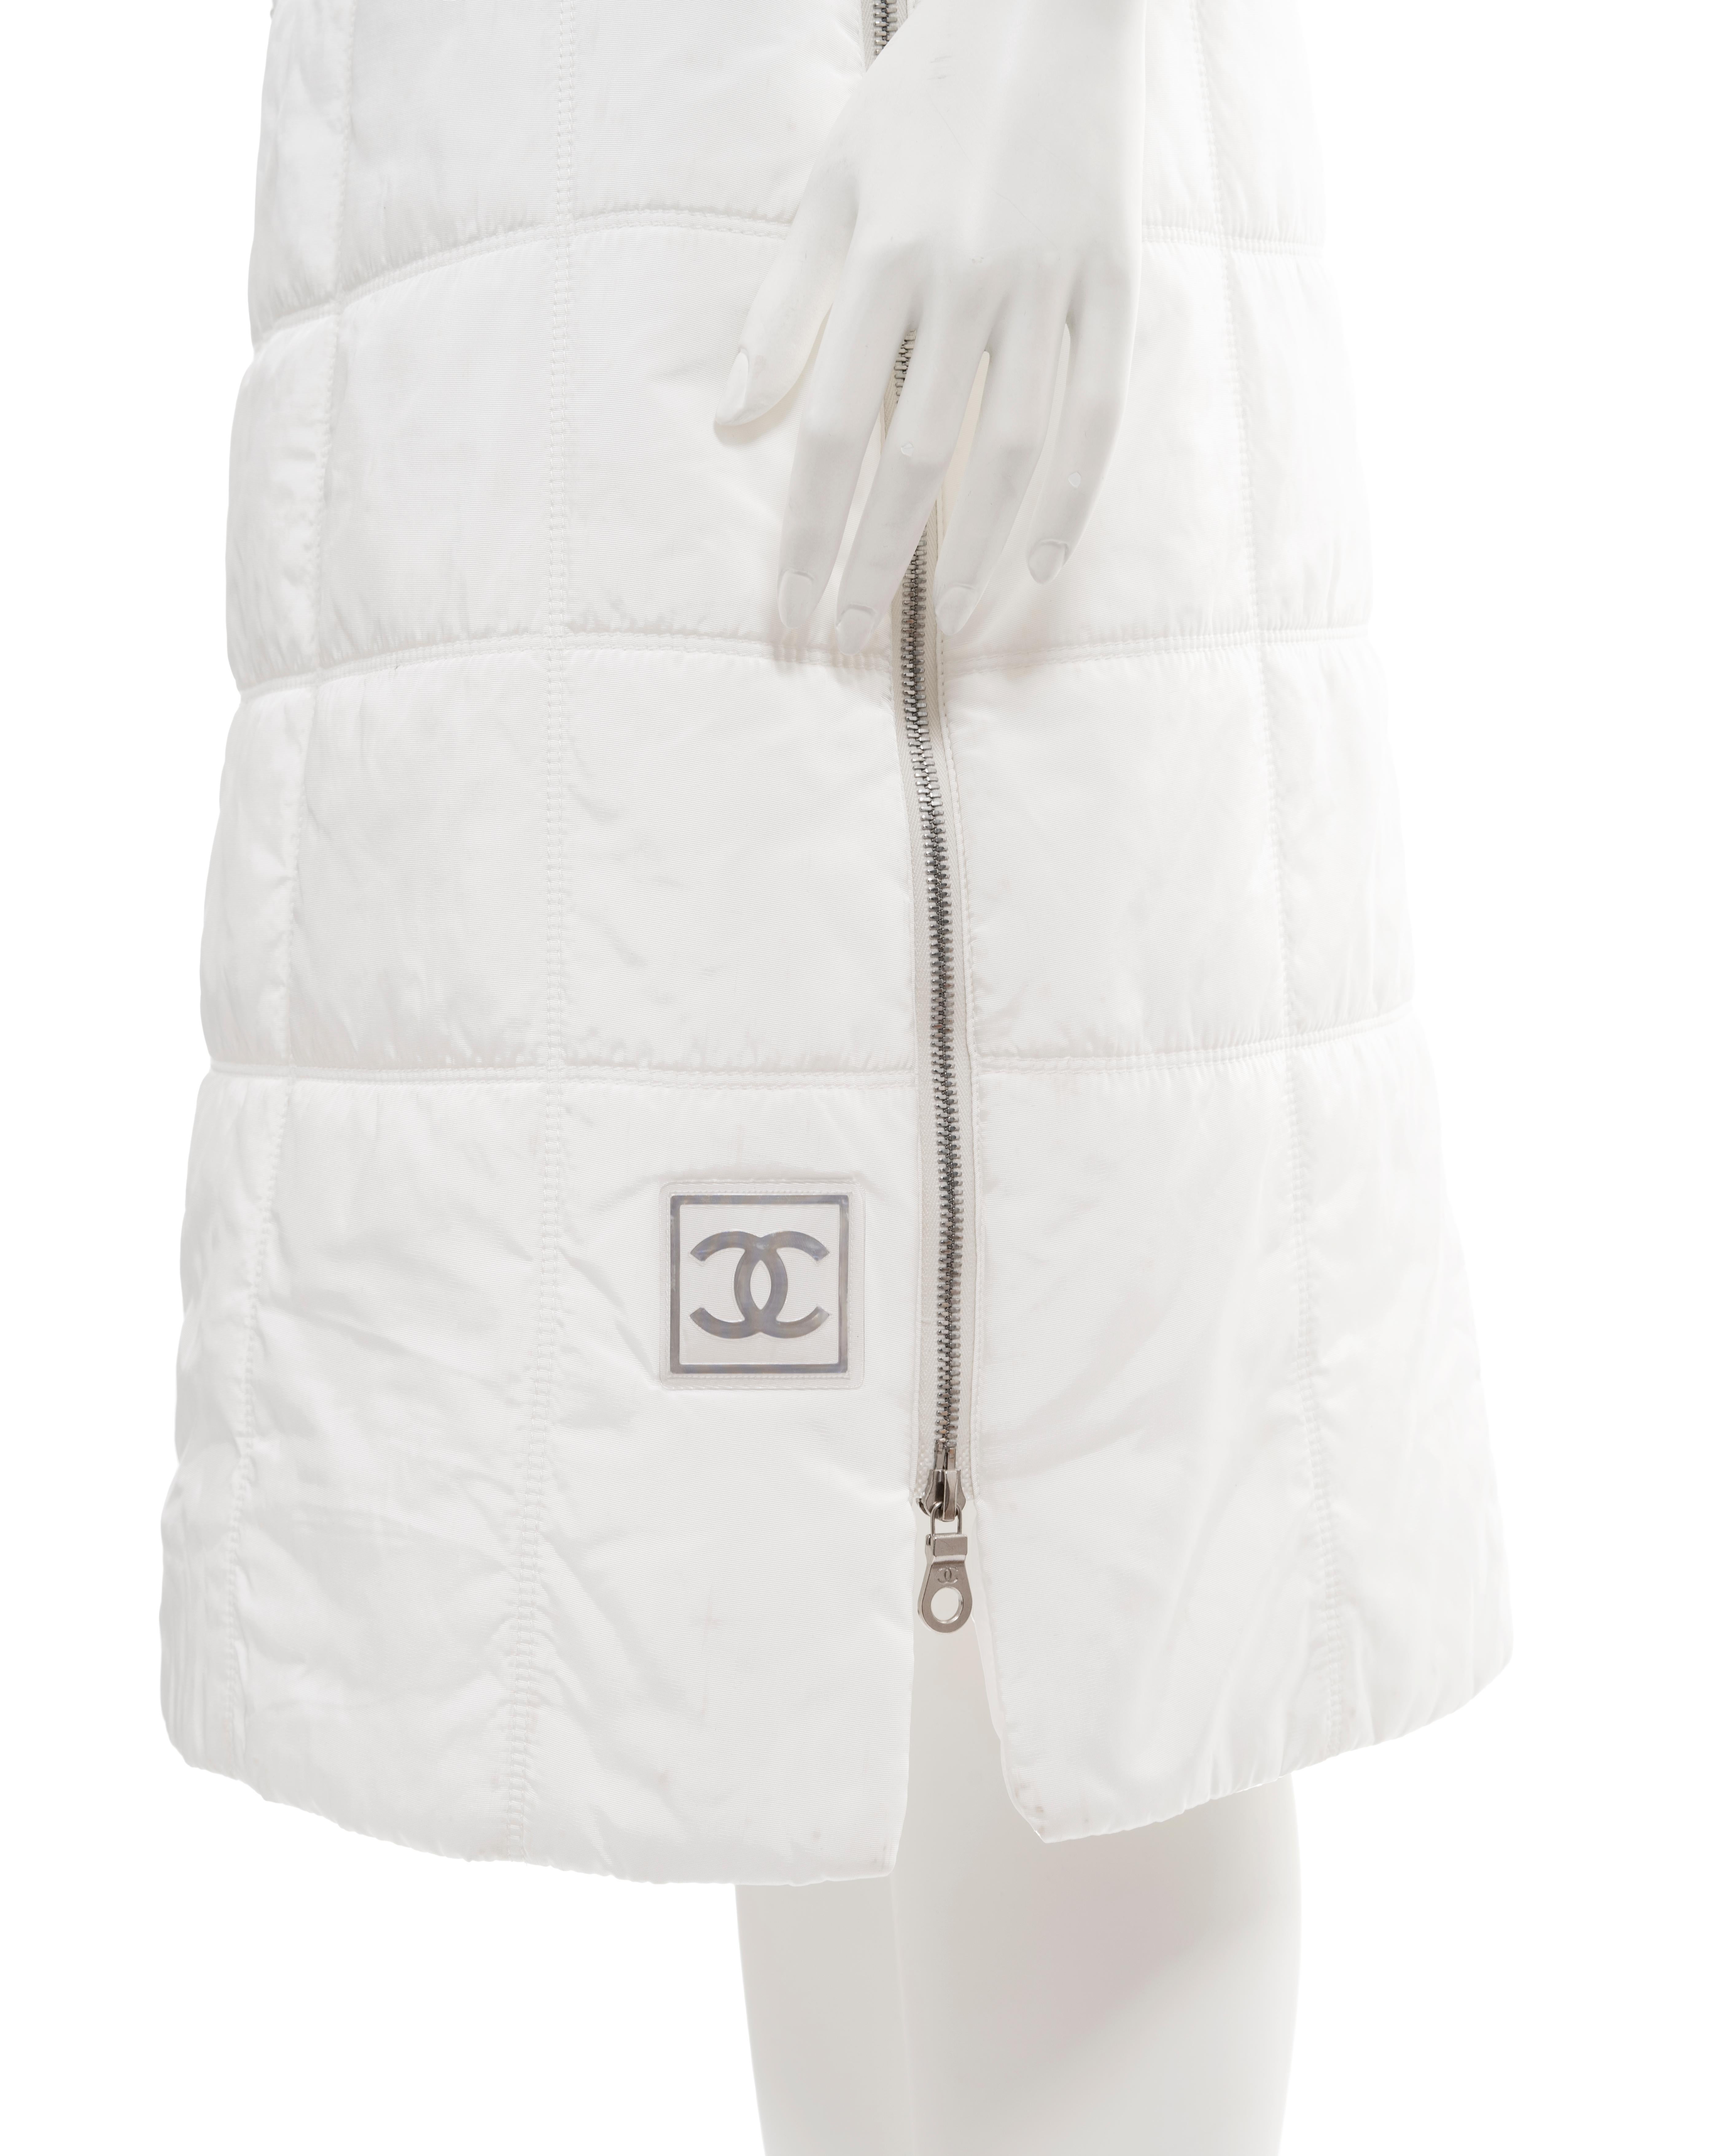 Chanel by Karl Lagerfeld white quilted nylon skirt and sports vest, ss 2001 For Sale 2